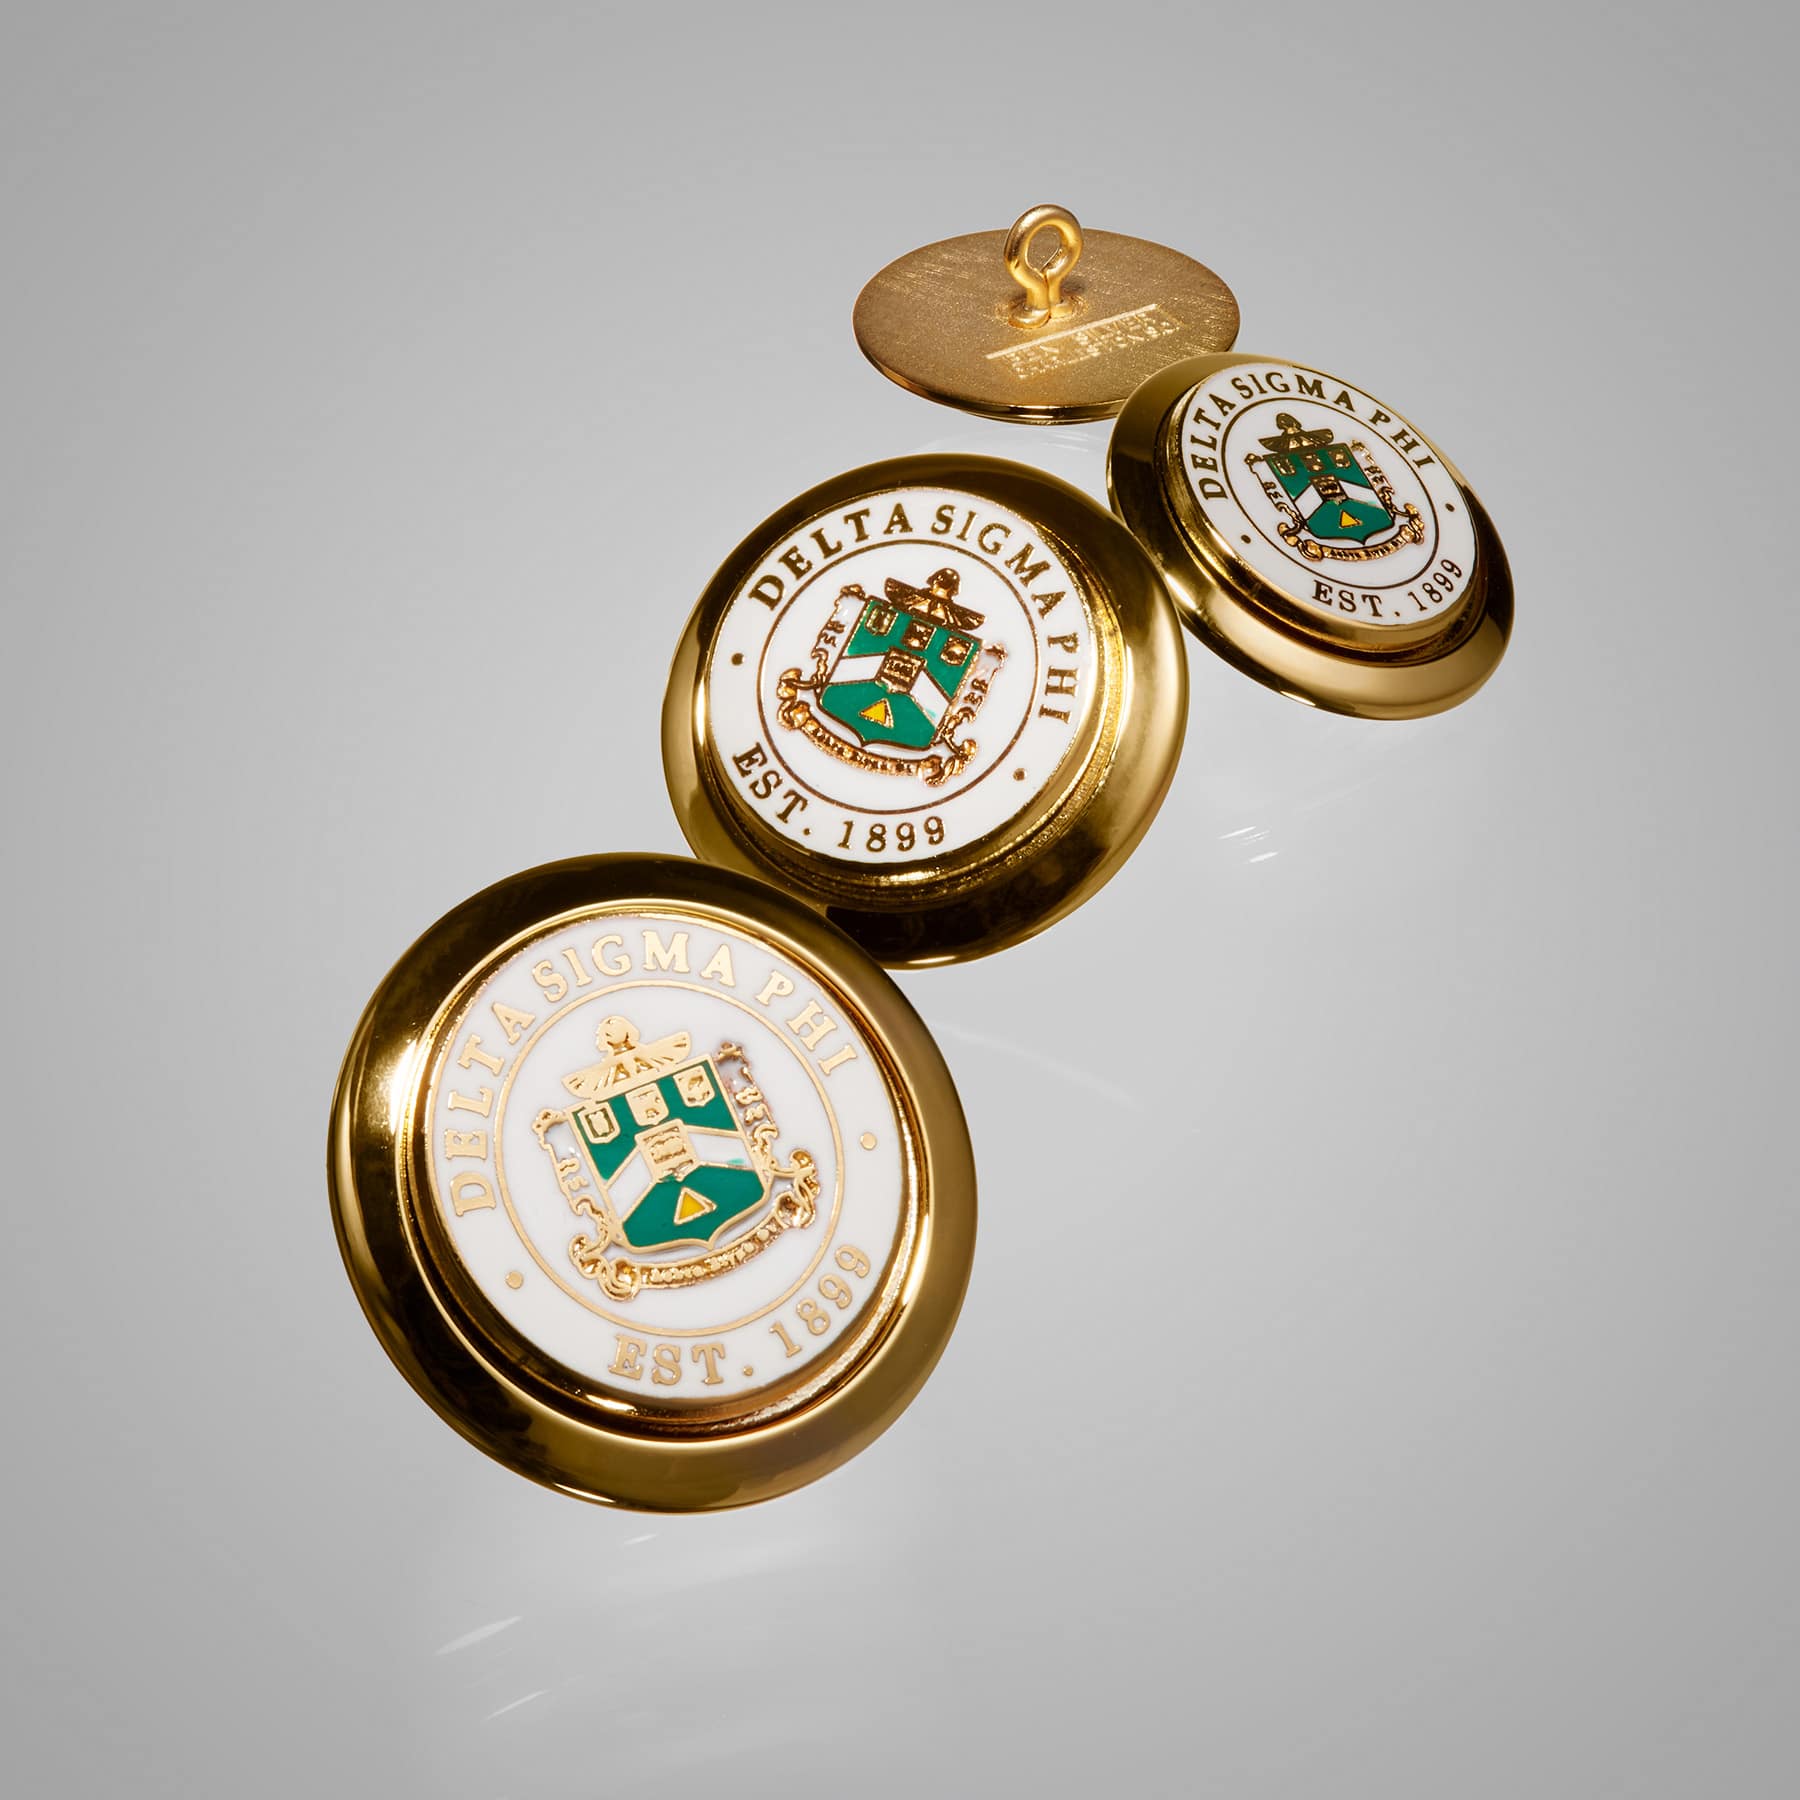 Delta Sigma Phi Fraternity Buttons